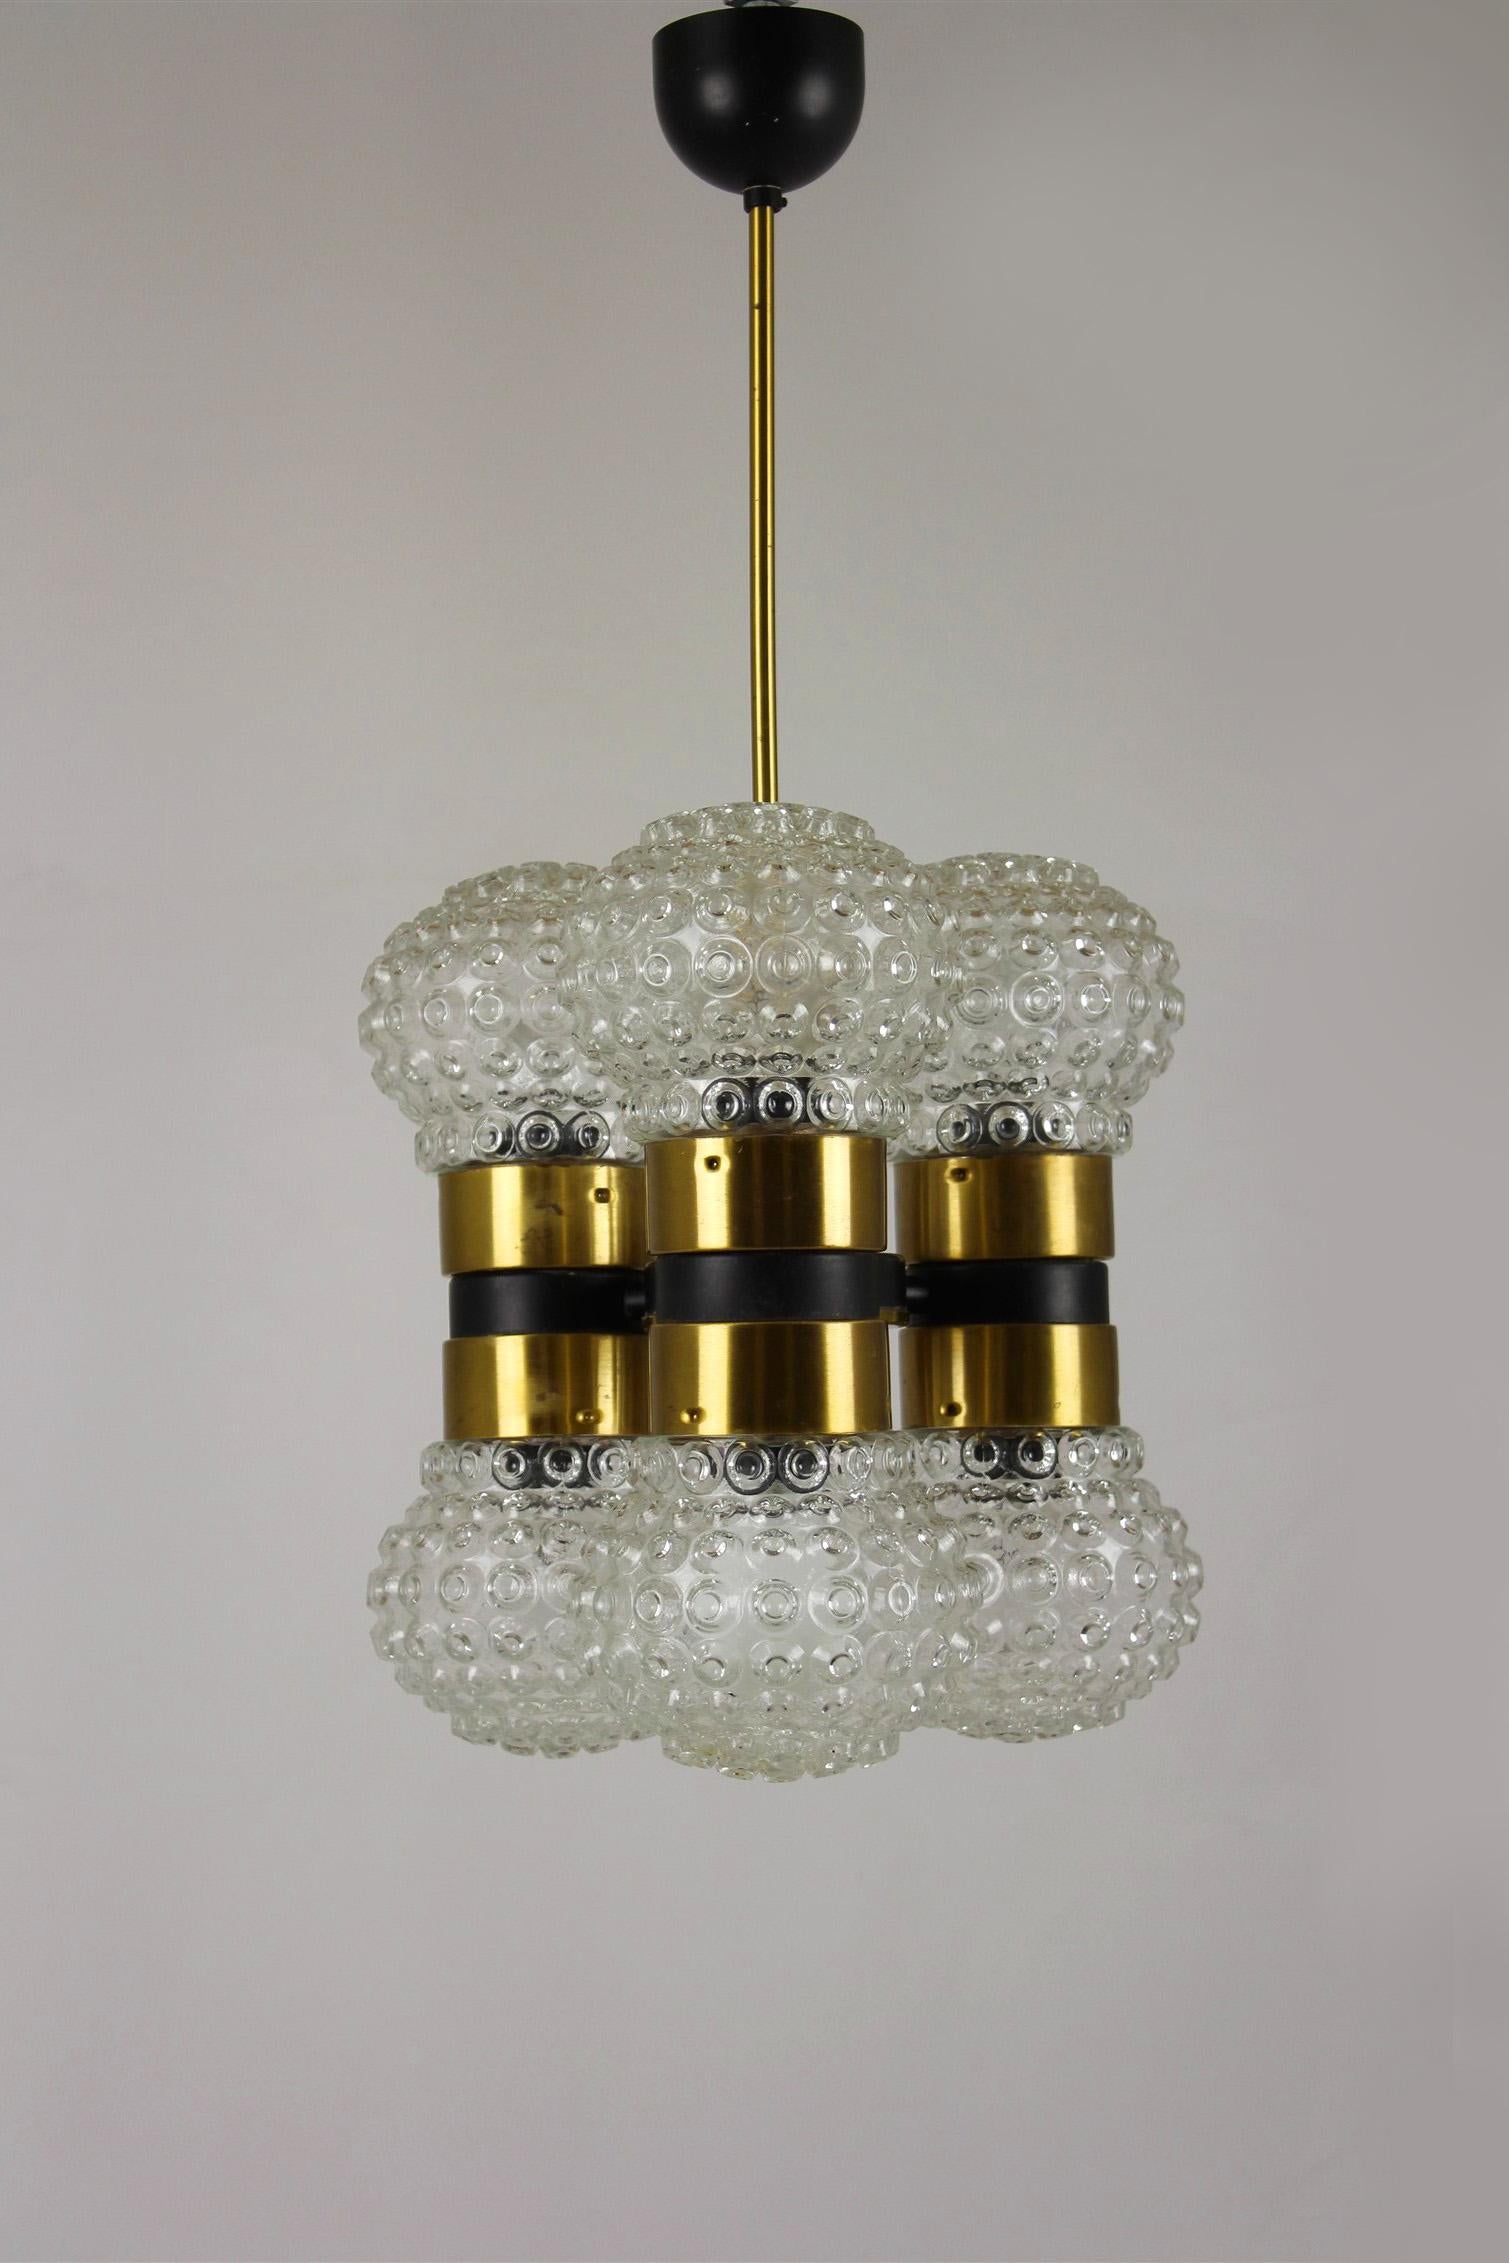 - Ceiling light dating from the 1960s or 1970s
- Made in former Czechoslovakia by Napako
- The lamp is fully functional.